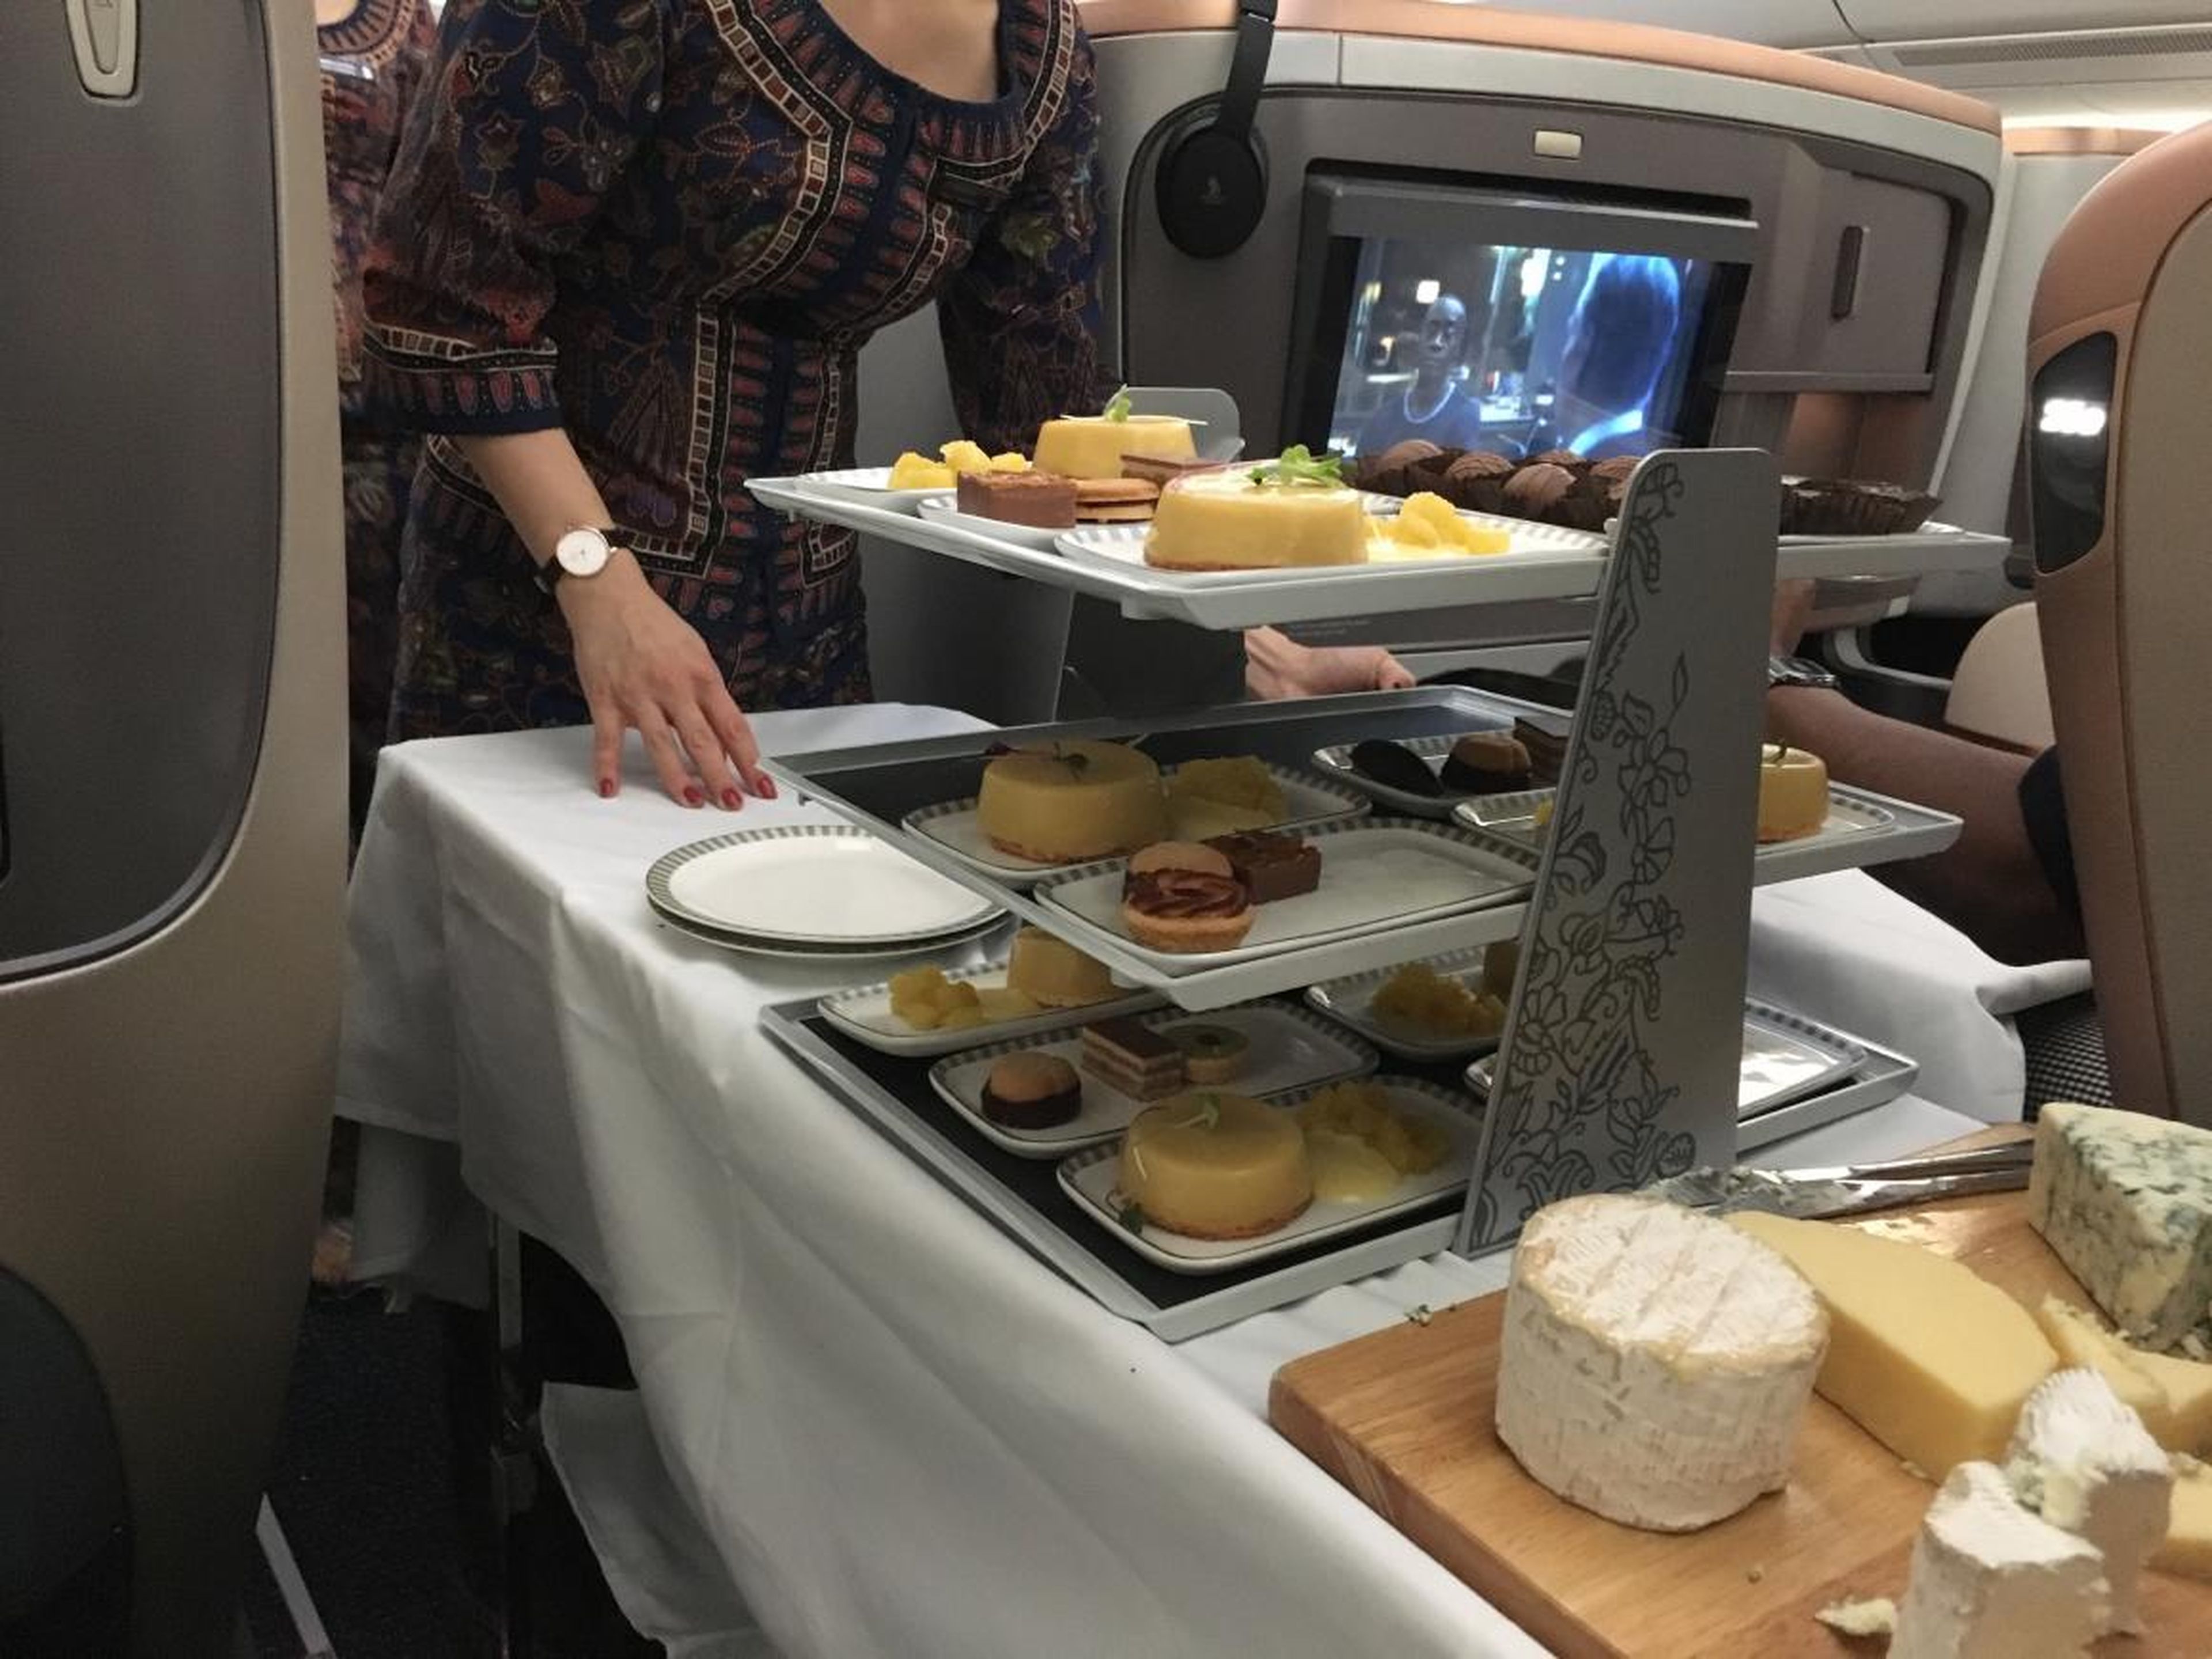 Flight attendants also came by each seat with a cart of cheeses, fruits, and desserts.